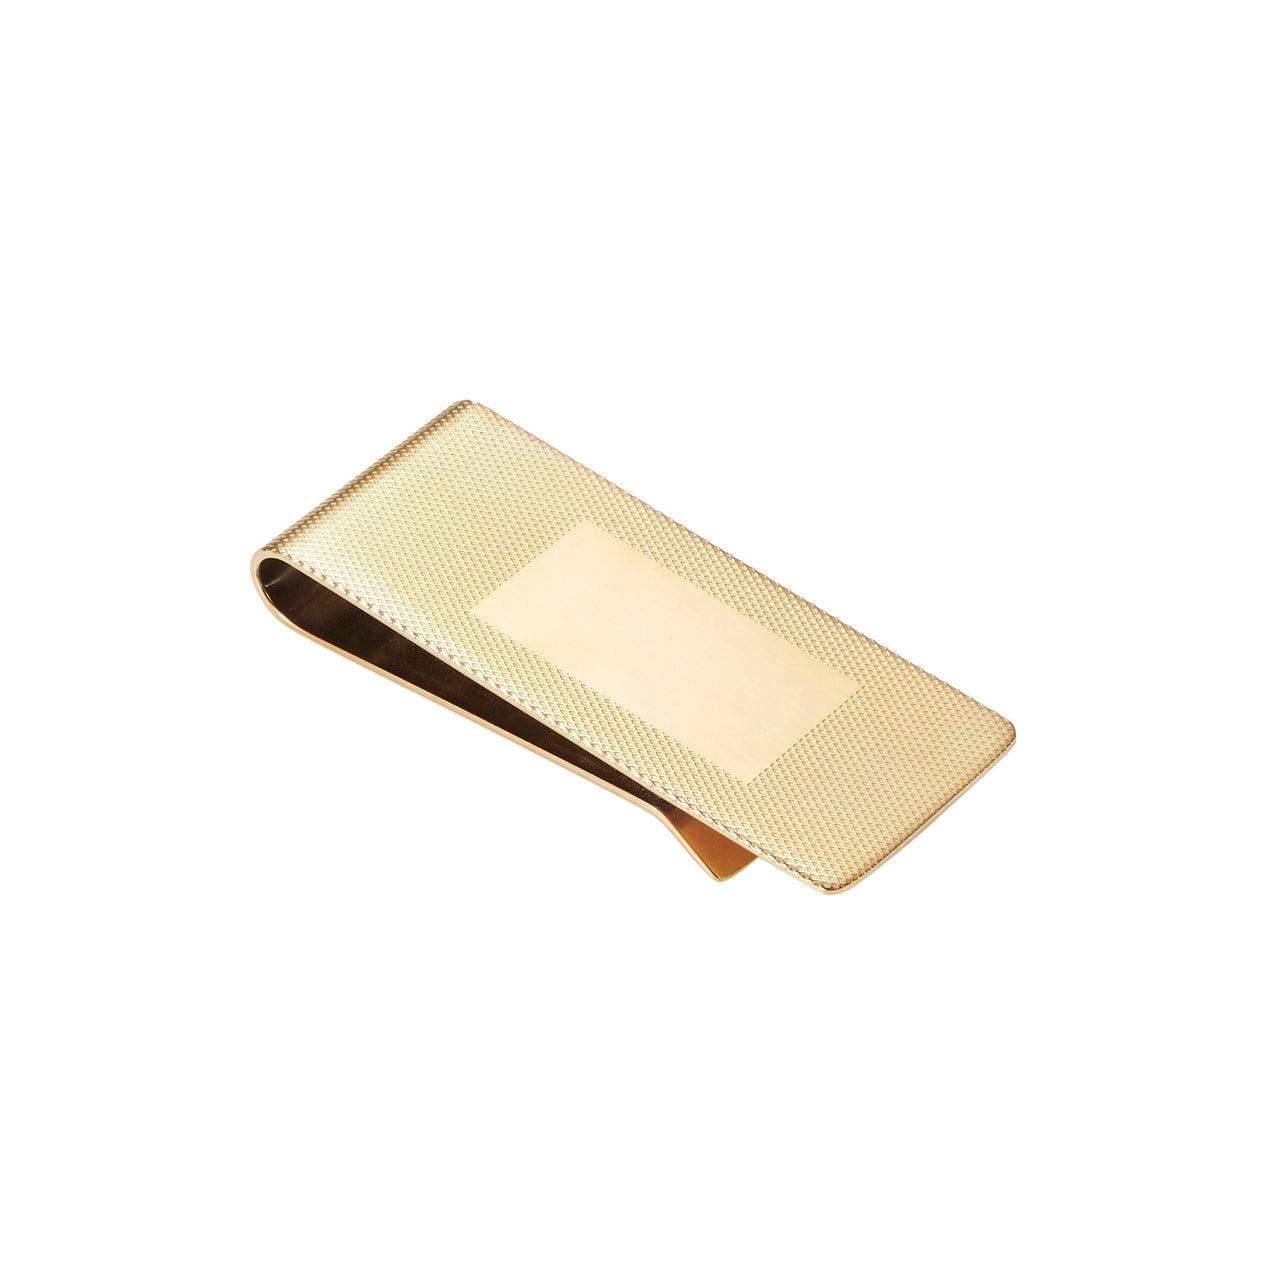 Cudworth ION Plated Gold/Stainless Money Clip